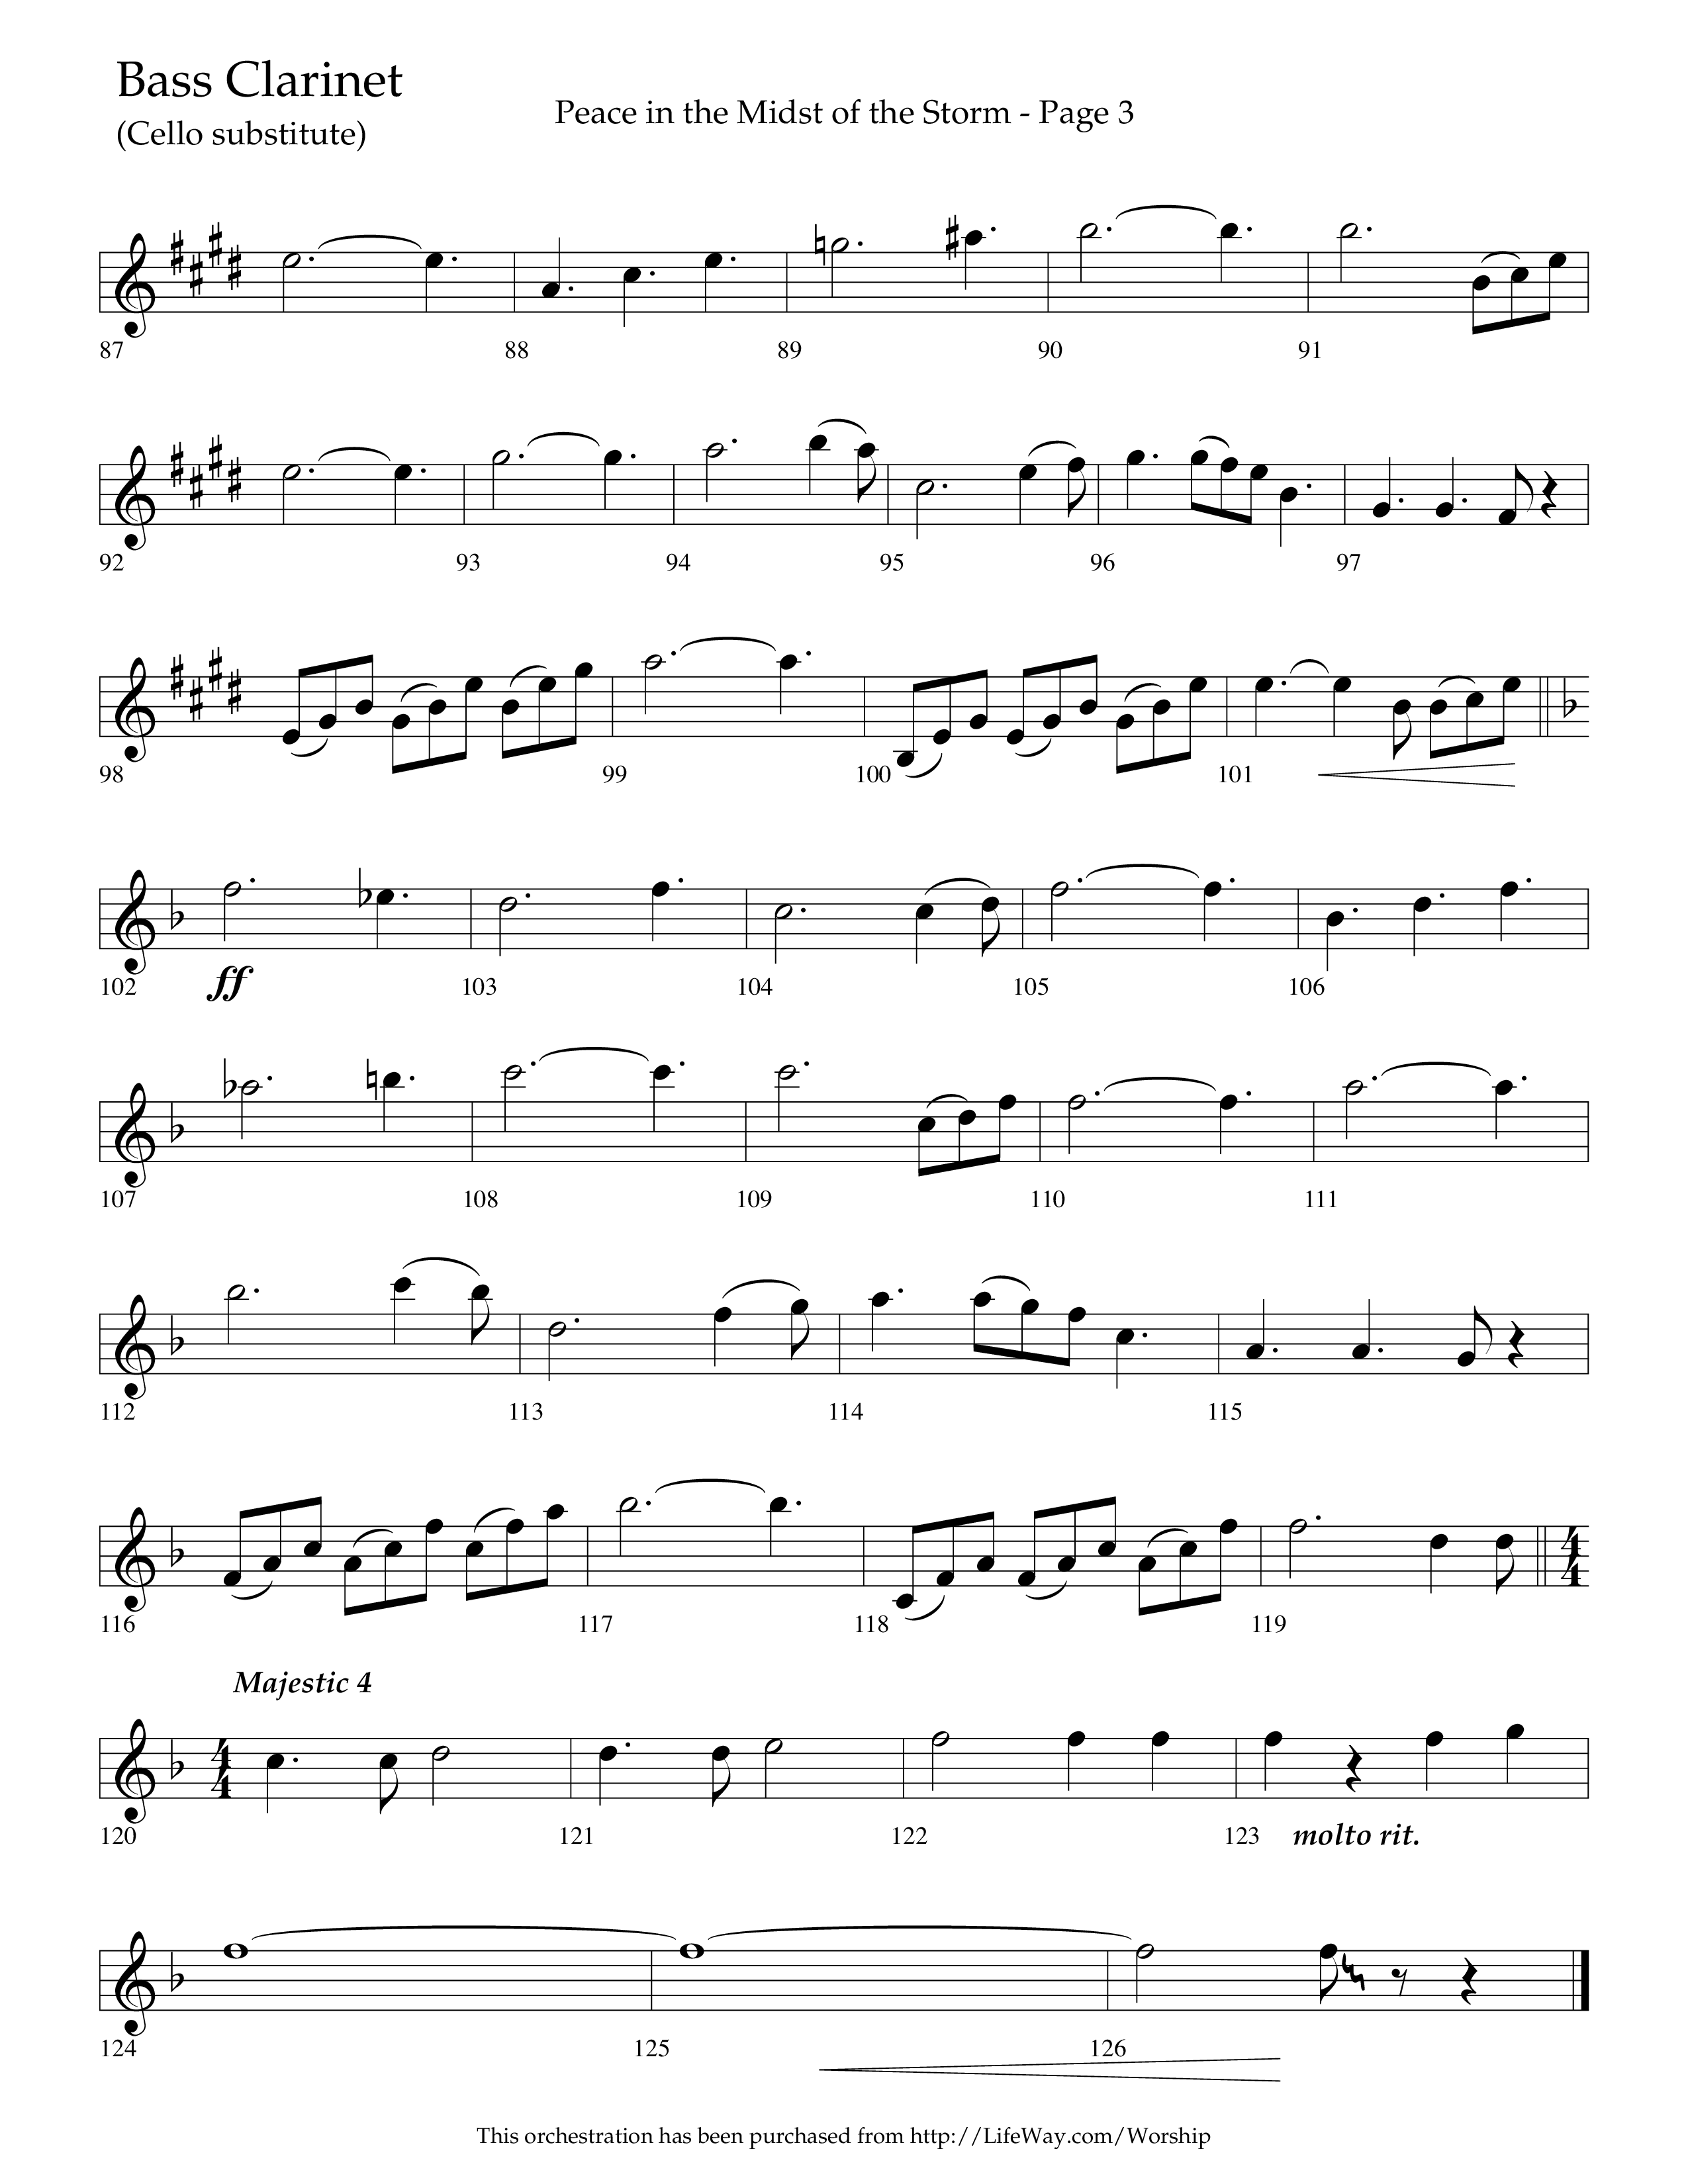 Peace In The Midst Of The Storm (Choral Anthem SATB) Bass Clarinet (Lifeway Choral / Arr. David T. Clydesdale)